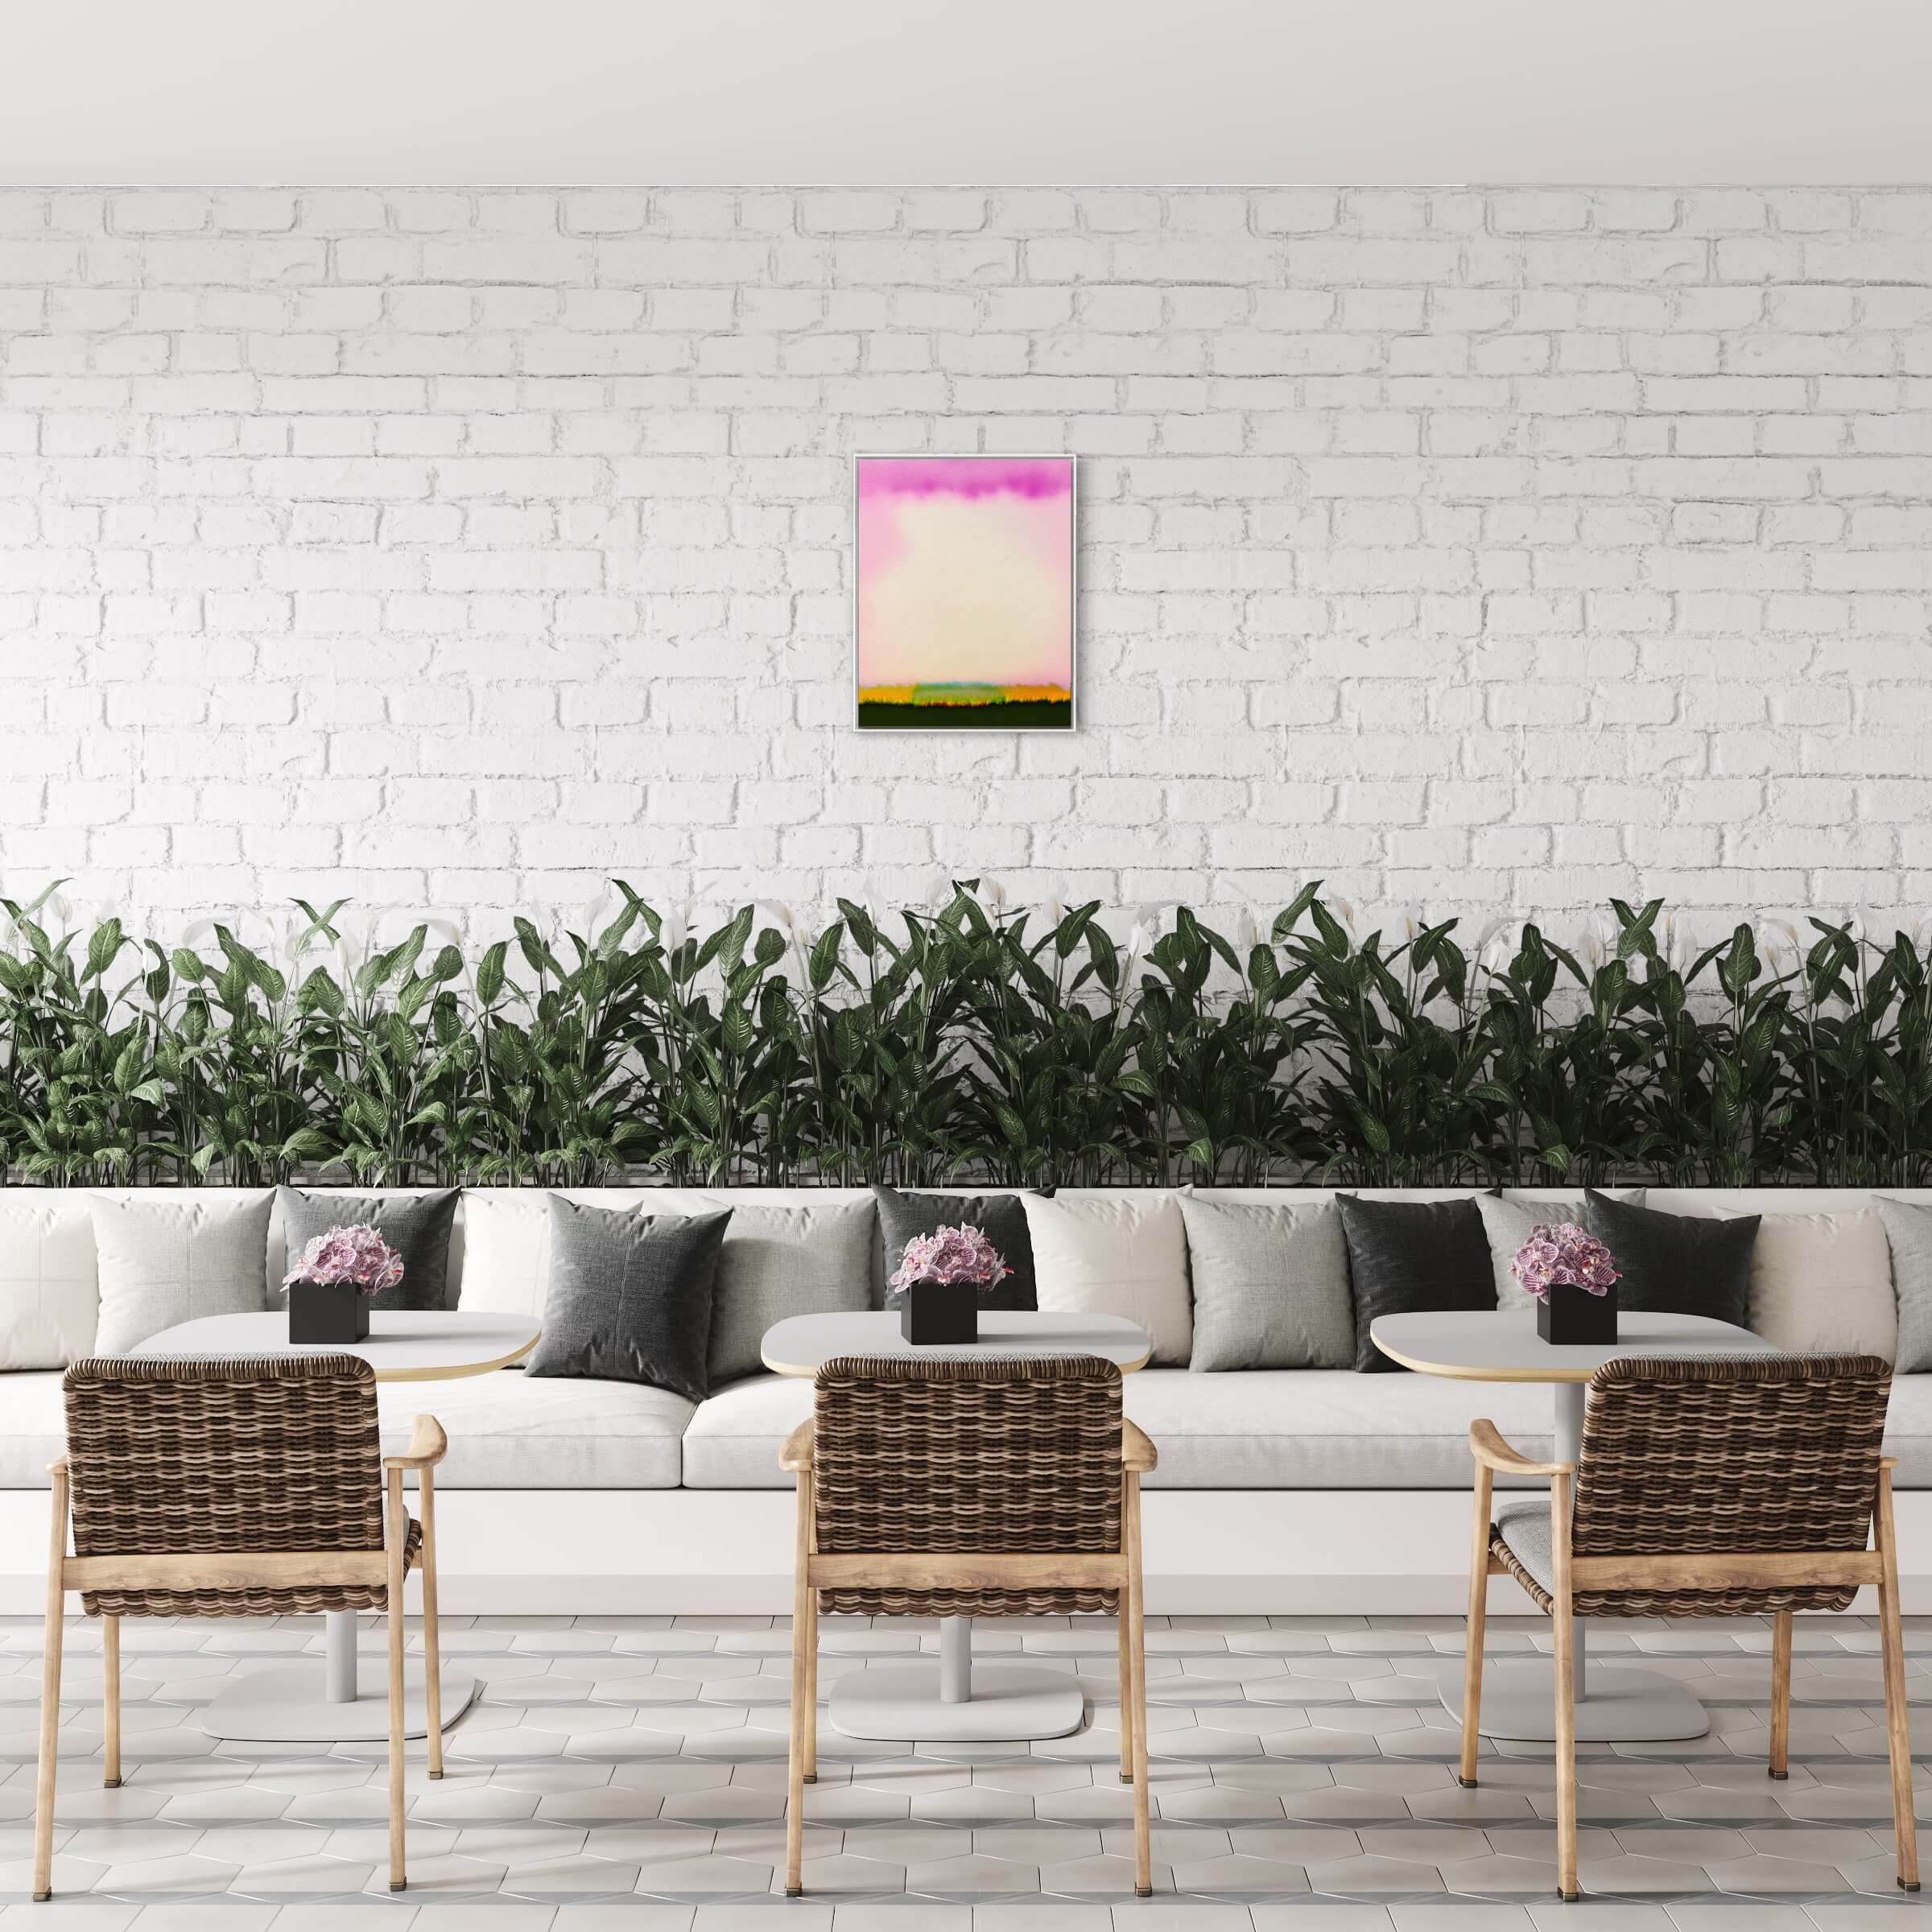 The image shows a bright, airy room with a white brick wall where "Heavy Cloud I" is hung, a small artwork with a prominent pink cloud at the top and a strip of green at the bottom. Below the artwork, there’s a long, continuous gray sofa lined with cushions, in front of which sit two rattan chairs with white tables. Behind the sofa, a row of lush green plants adds a touch of nature to the space. The room’s floor is tiled in a herringbone pattern, contributing to the clean and modern feel of the setting.